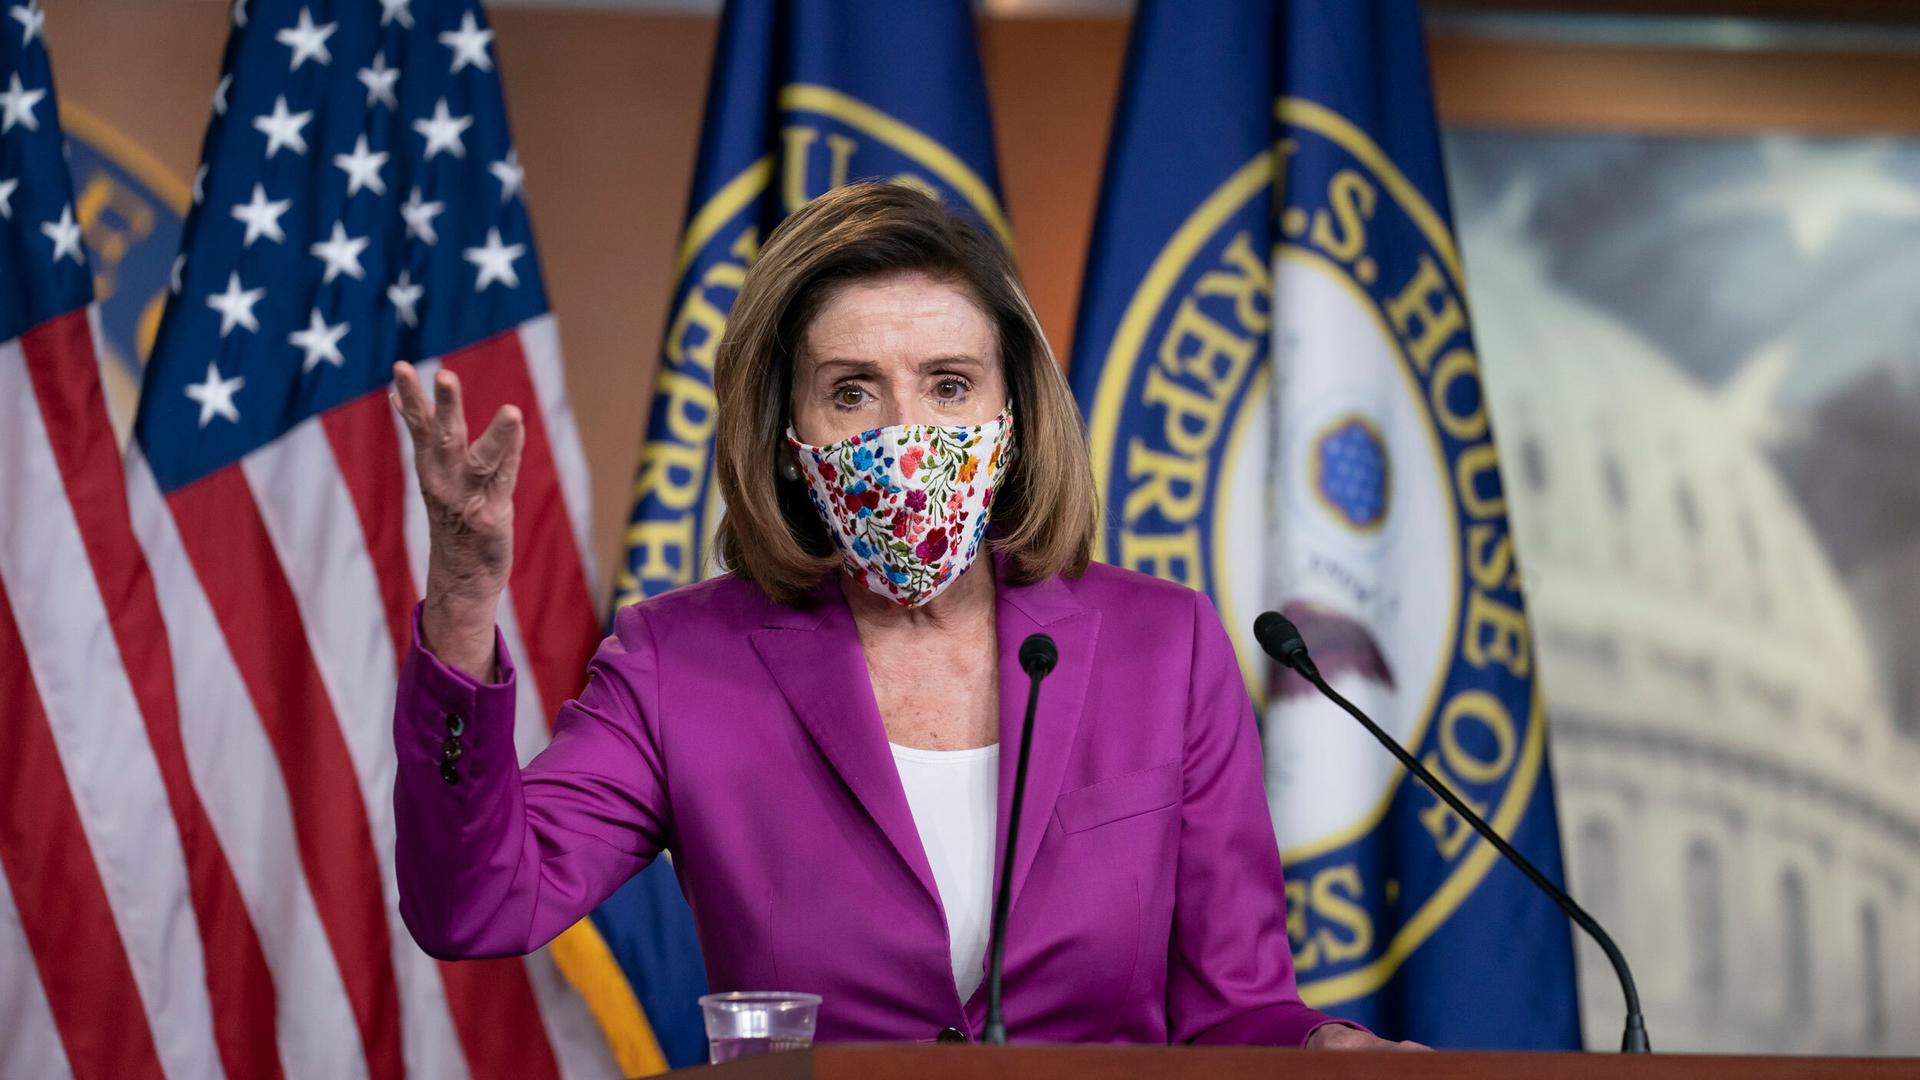 Speaker of the House Nancy Pelosi holds a news conference on the day after a violent attack on the US Congress, Jan. 7, 2021.